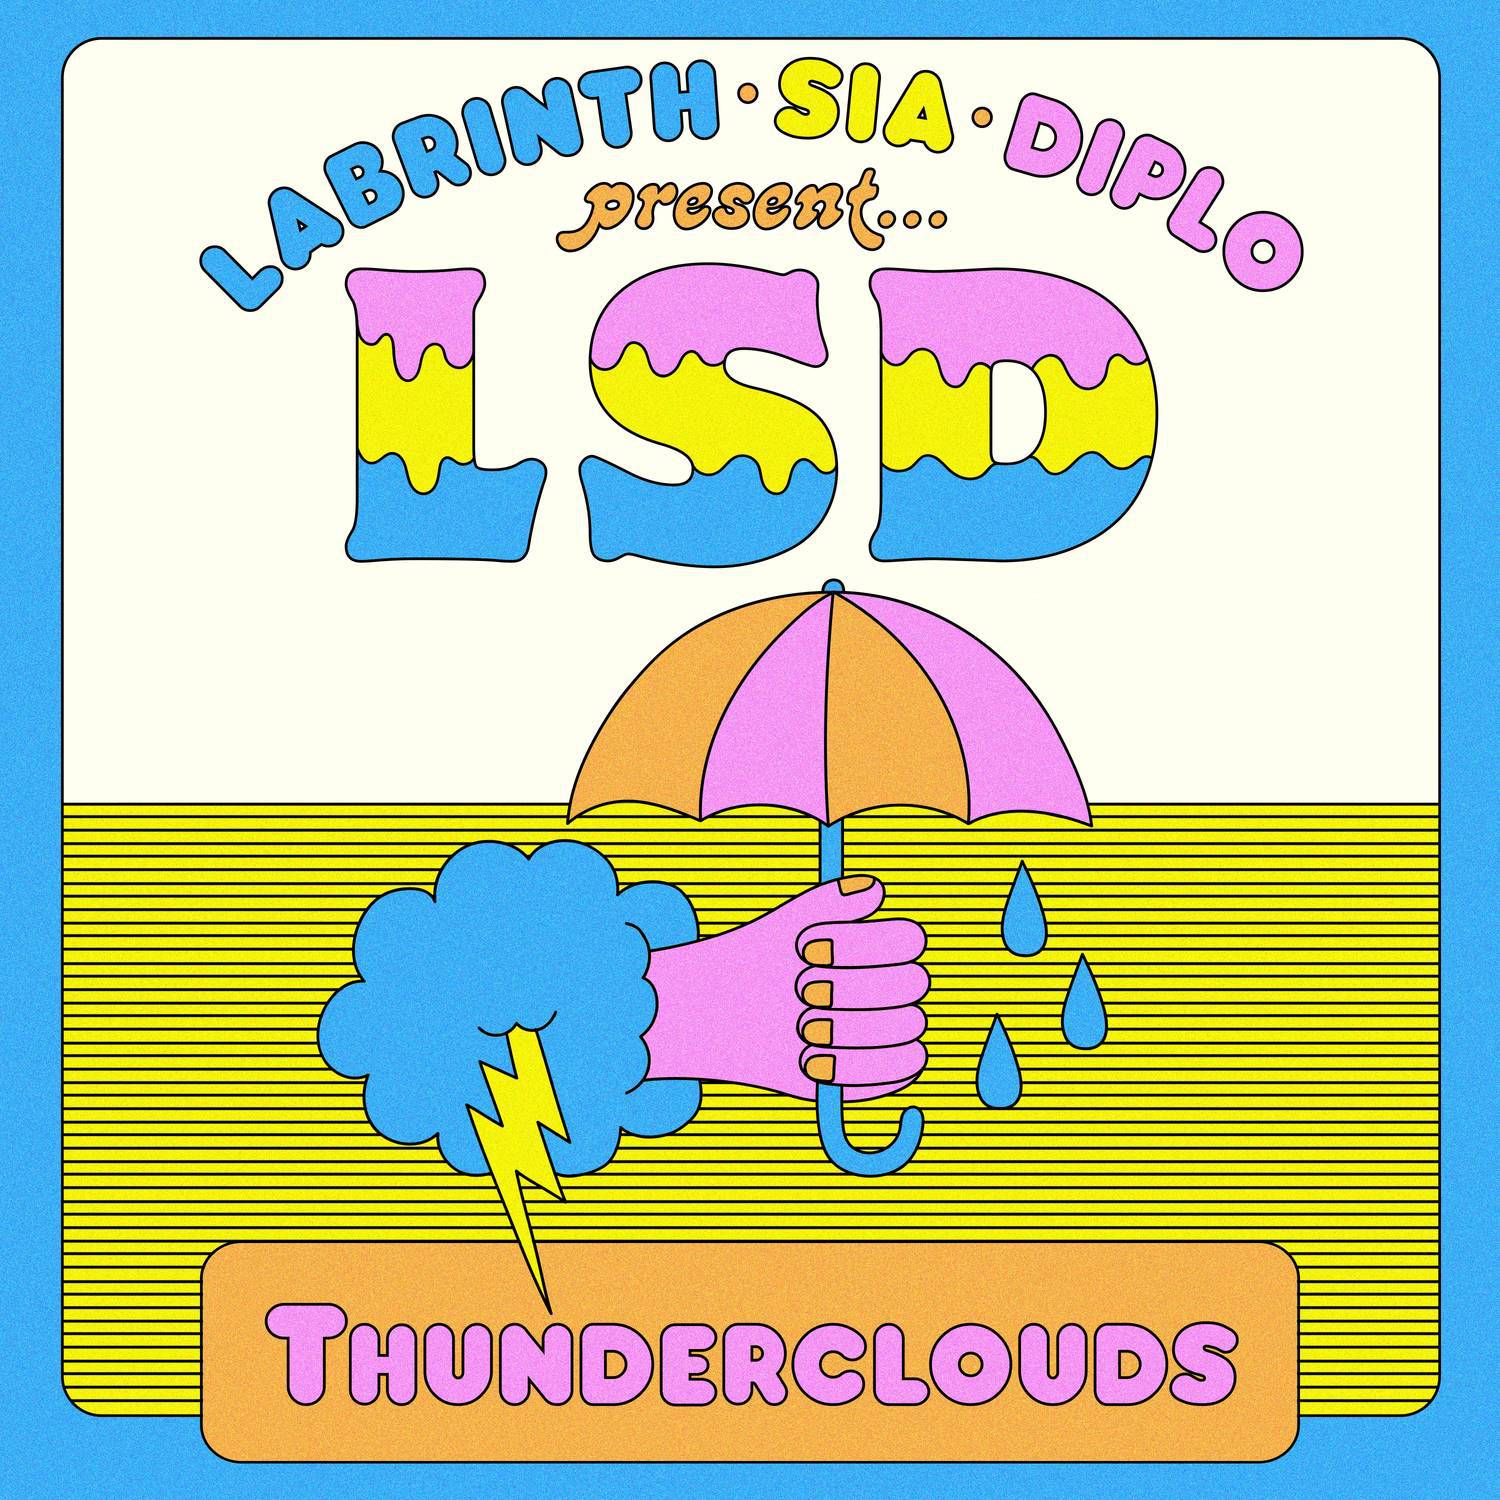 Thunderclouds专辑